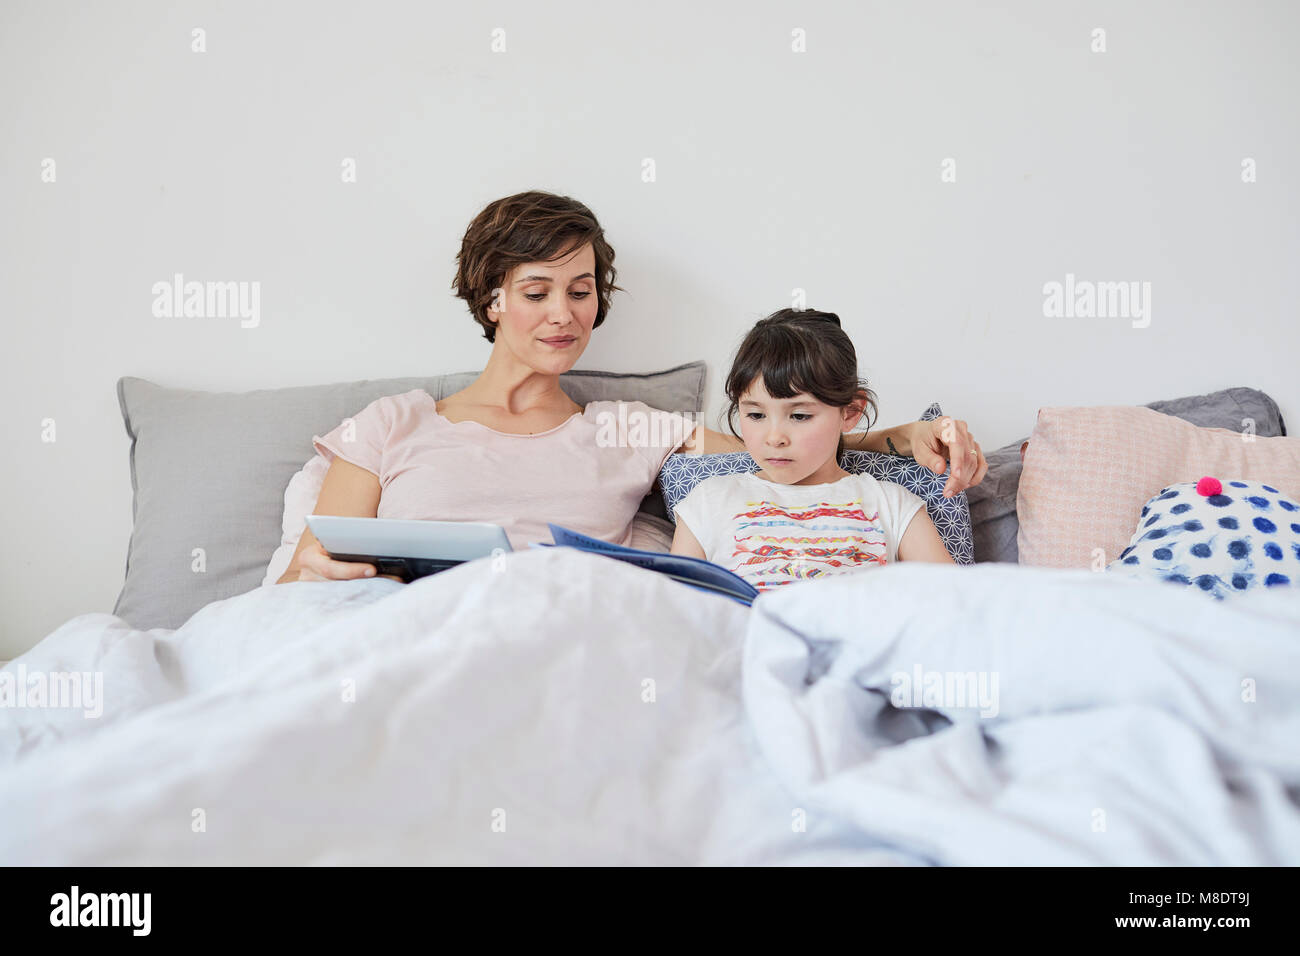 Mother and daughter relaxing in bed, daughter reading book, mother holding digital tablet Stock Photo